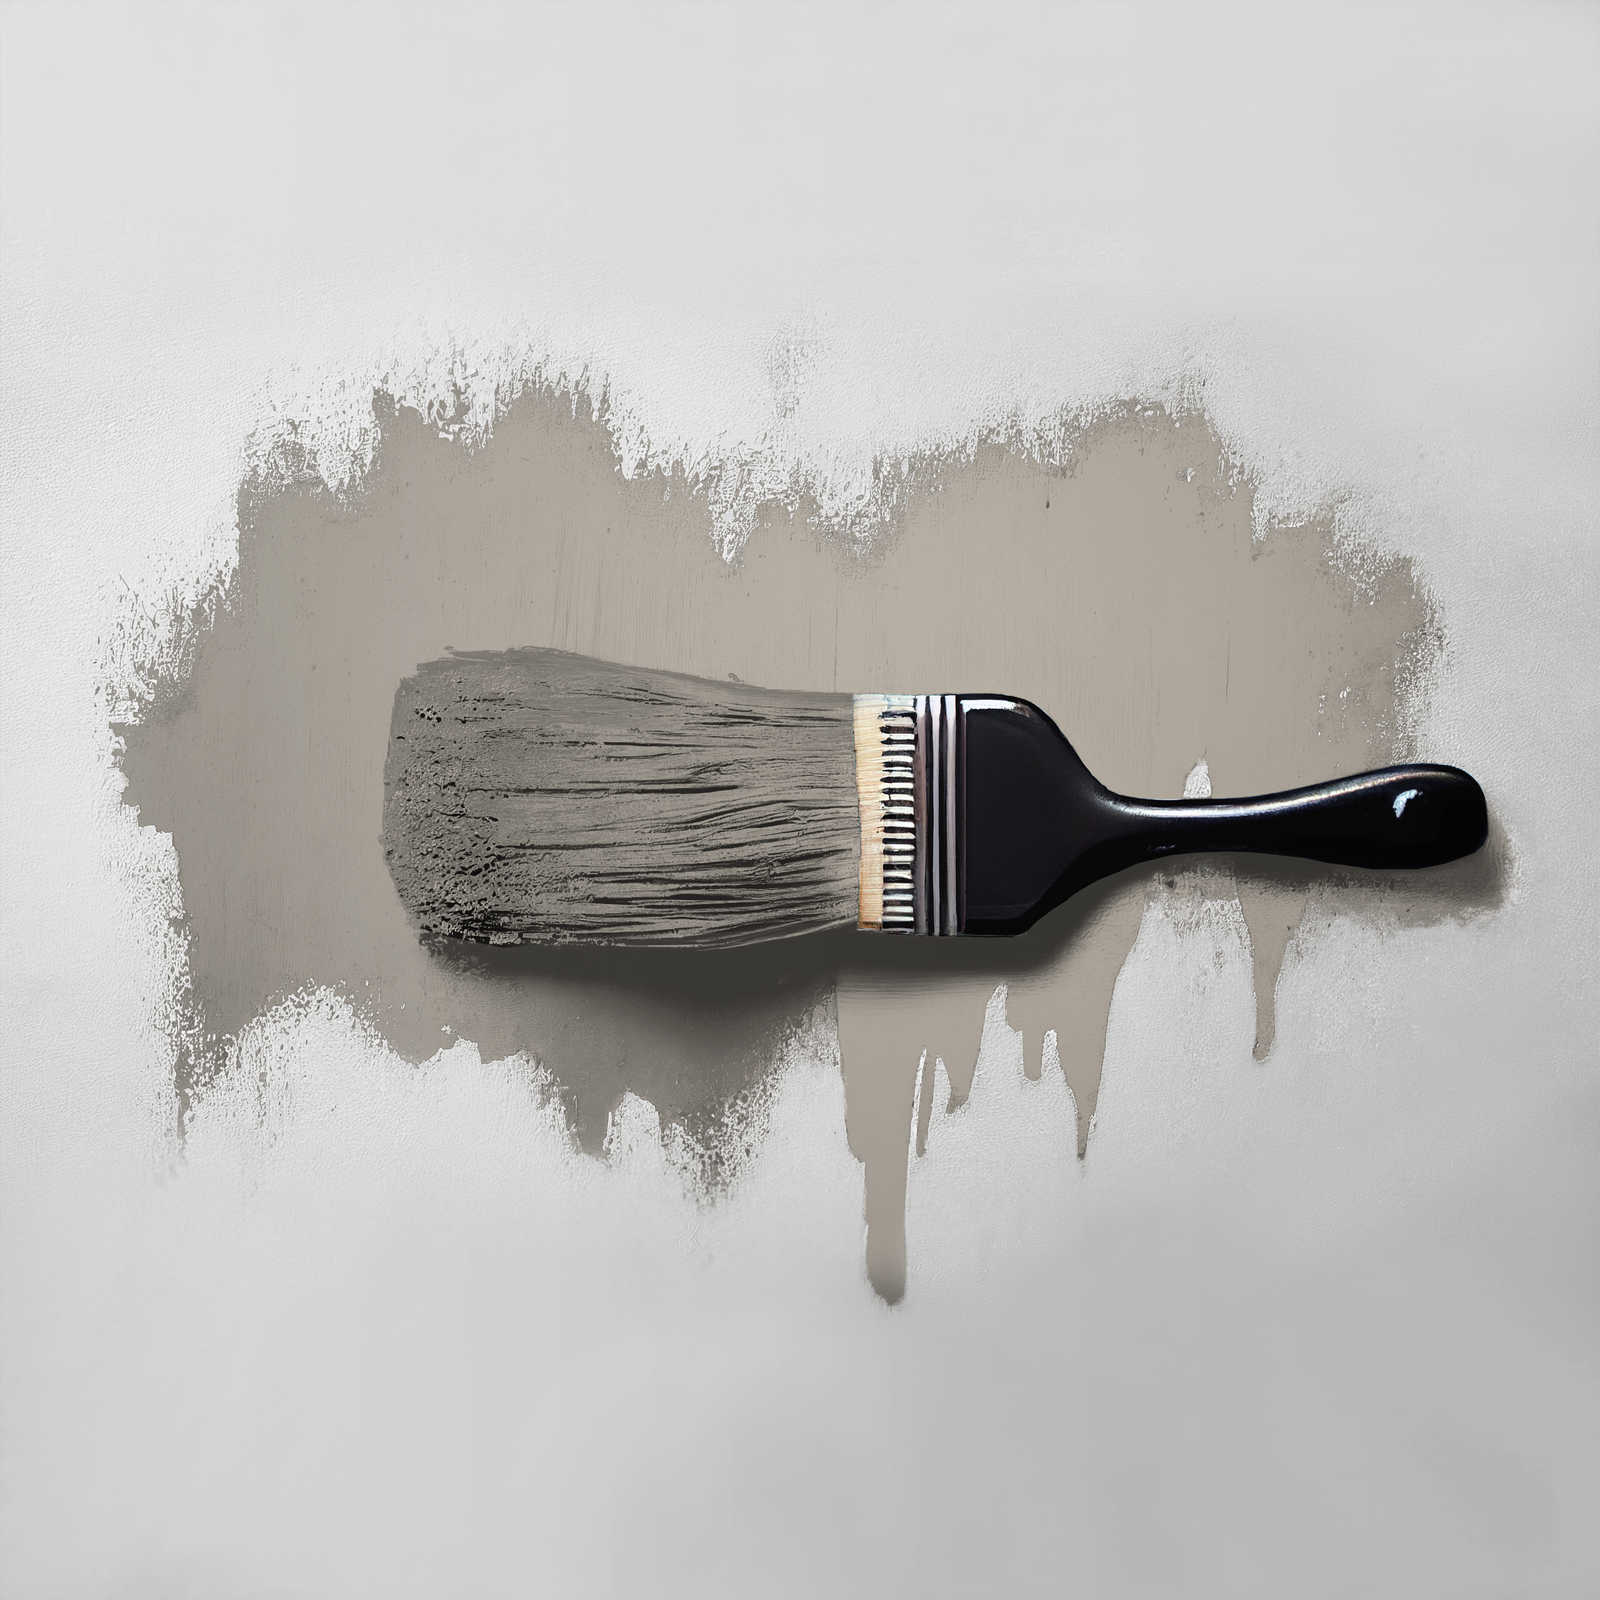             Wall Paint TCK1019 »Grey Pumpkin« in homely taupe – 5.0 litre
        